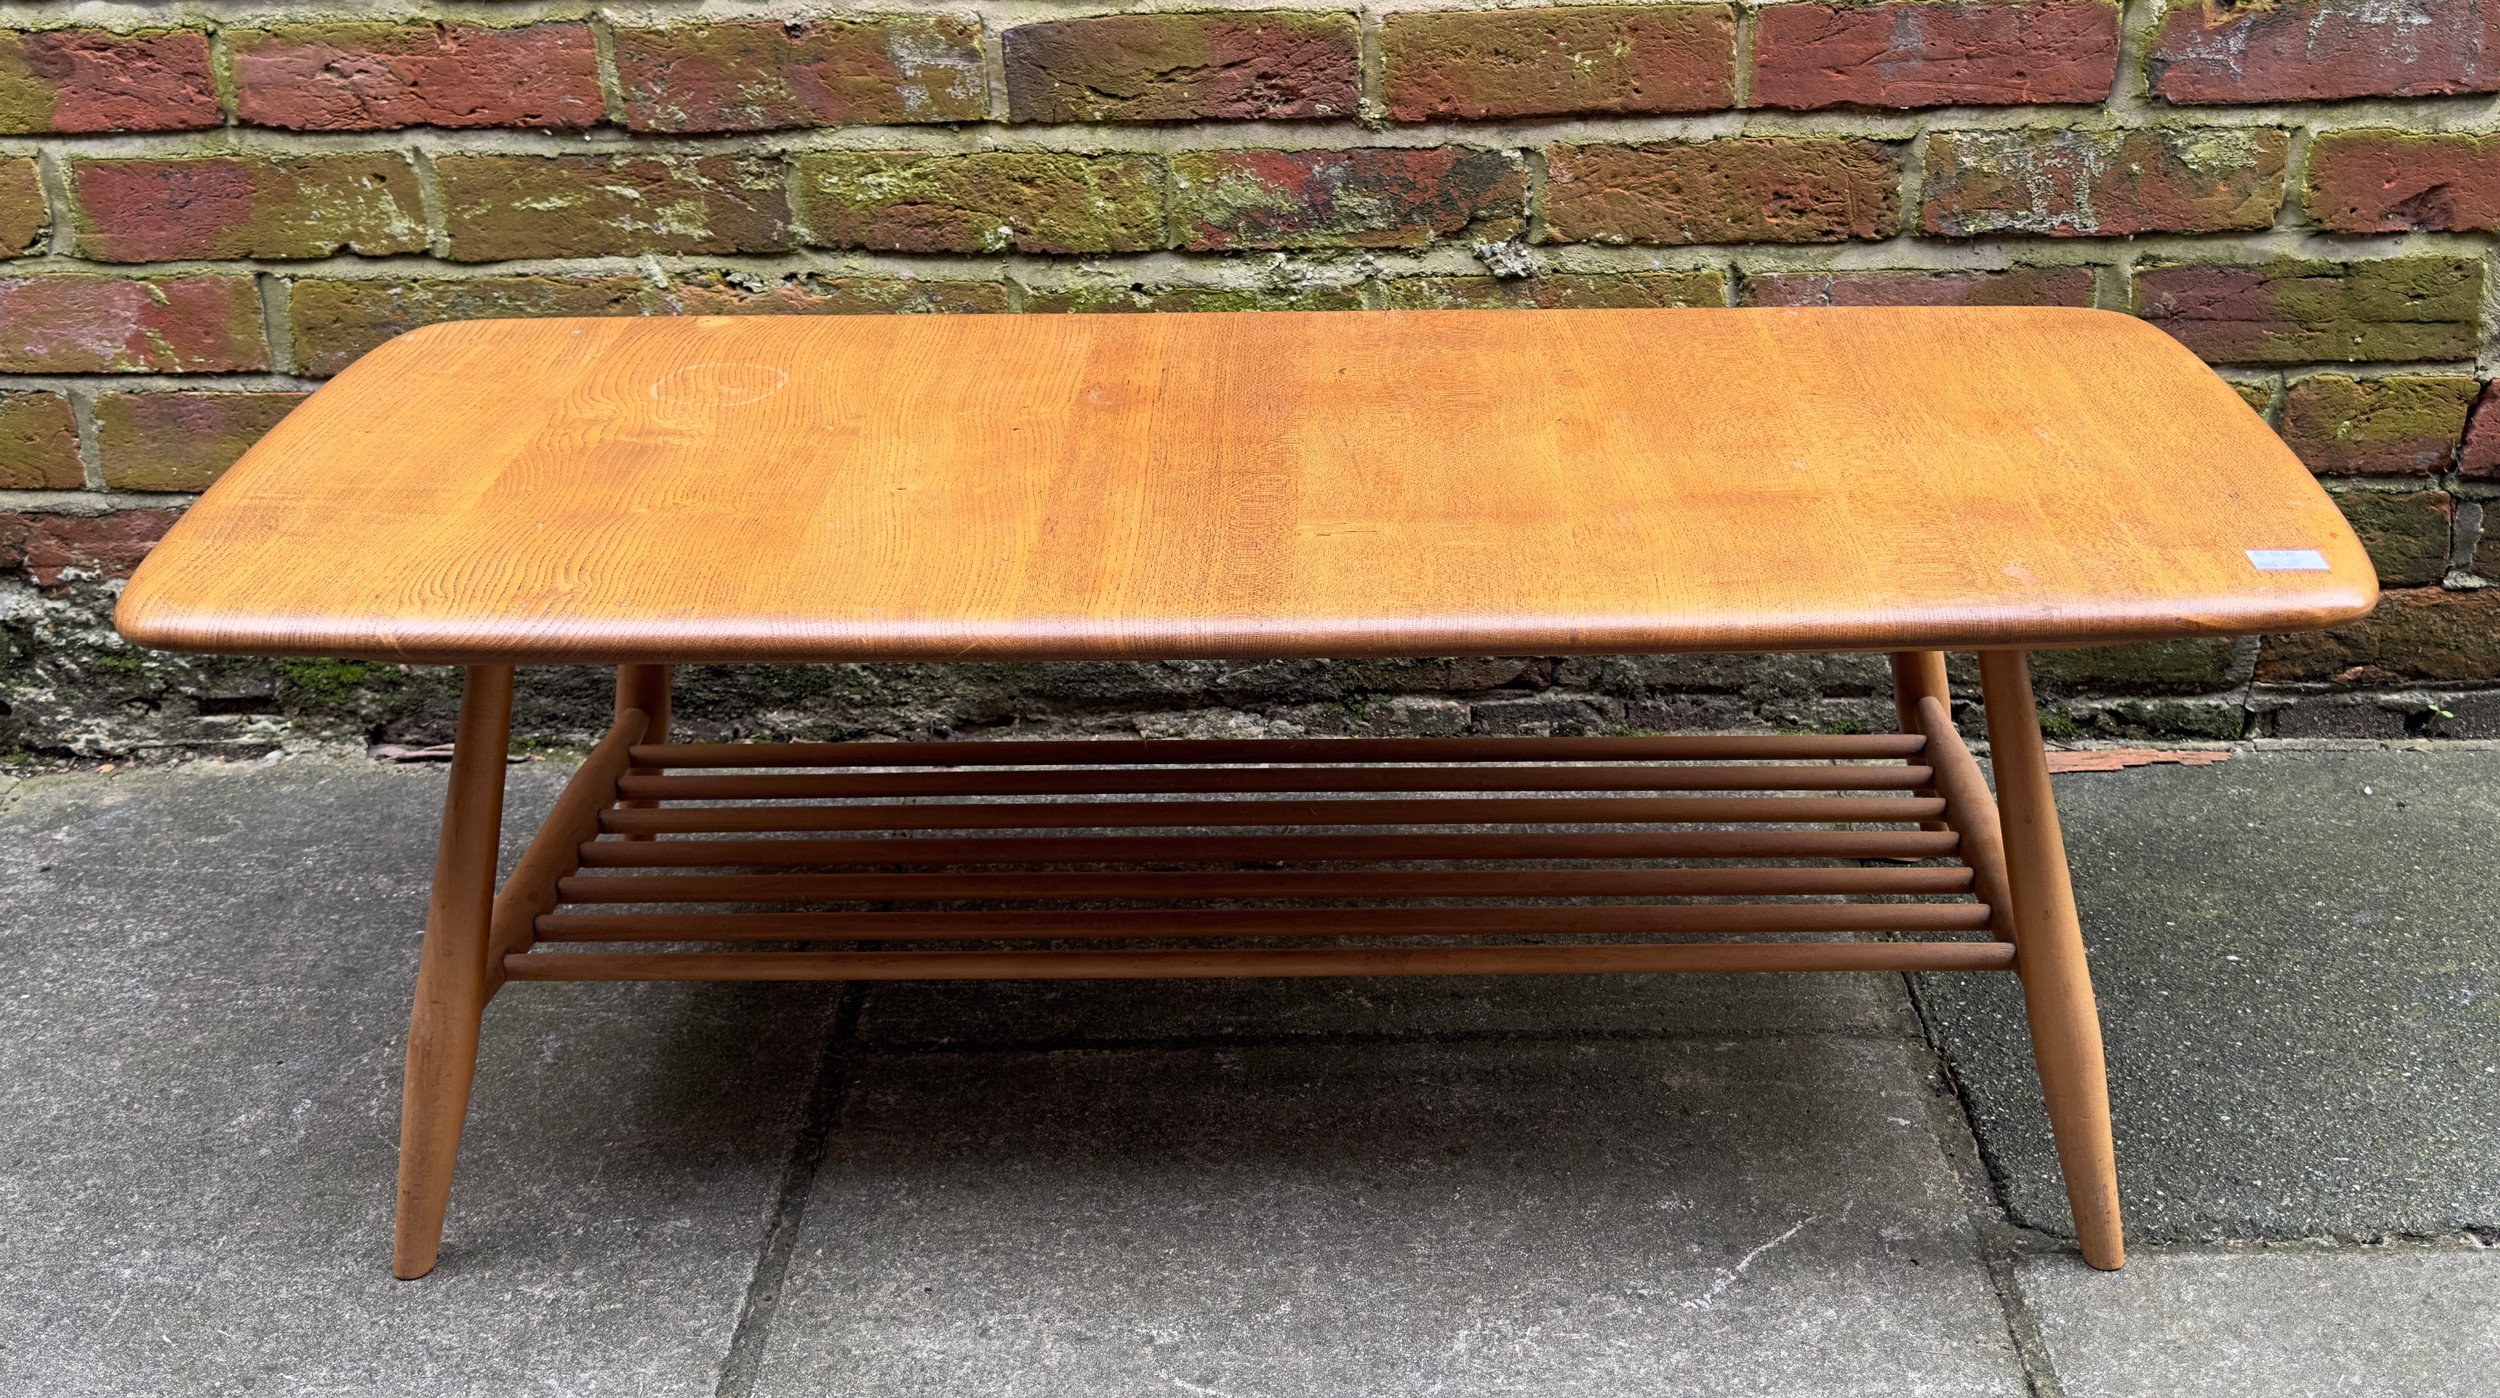 An Ercol blonde elm Windsor low coffee table, model no. 459, of rectangular form, with rounded